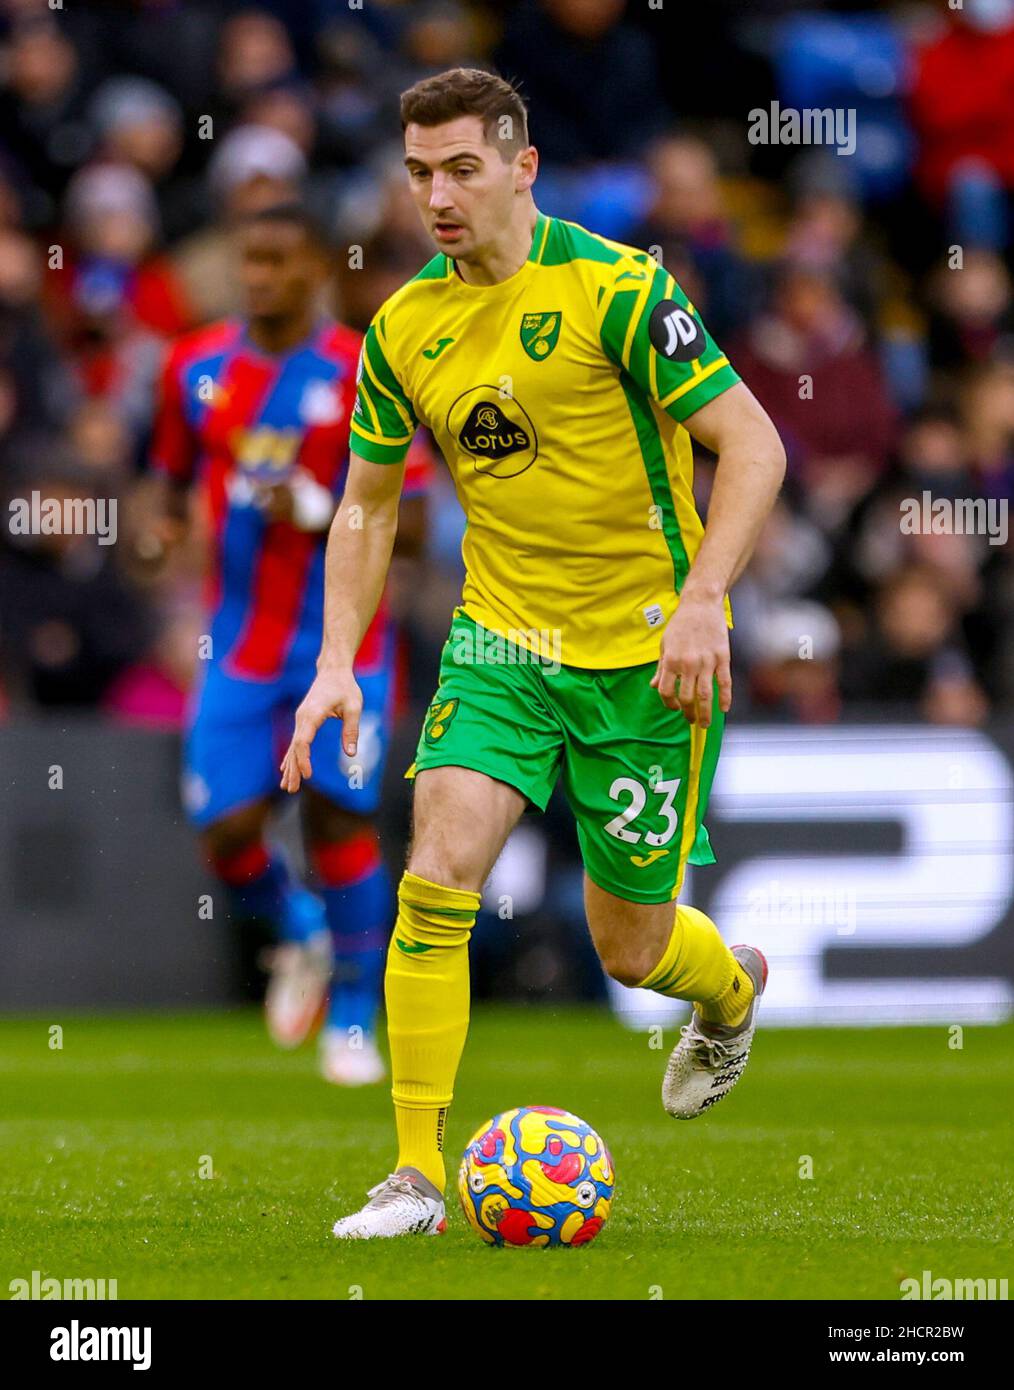 Filephoto dated 28-12-2021 of Norwich City's Kenny McLean who has told the Norwich boo-boys to lay off Billy Gilmour and insists the whole squad need to raise their own game in the battle for Premier League survival next year.. Issue date: Friday December 31, 2021. Stock Photo